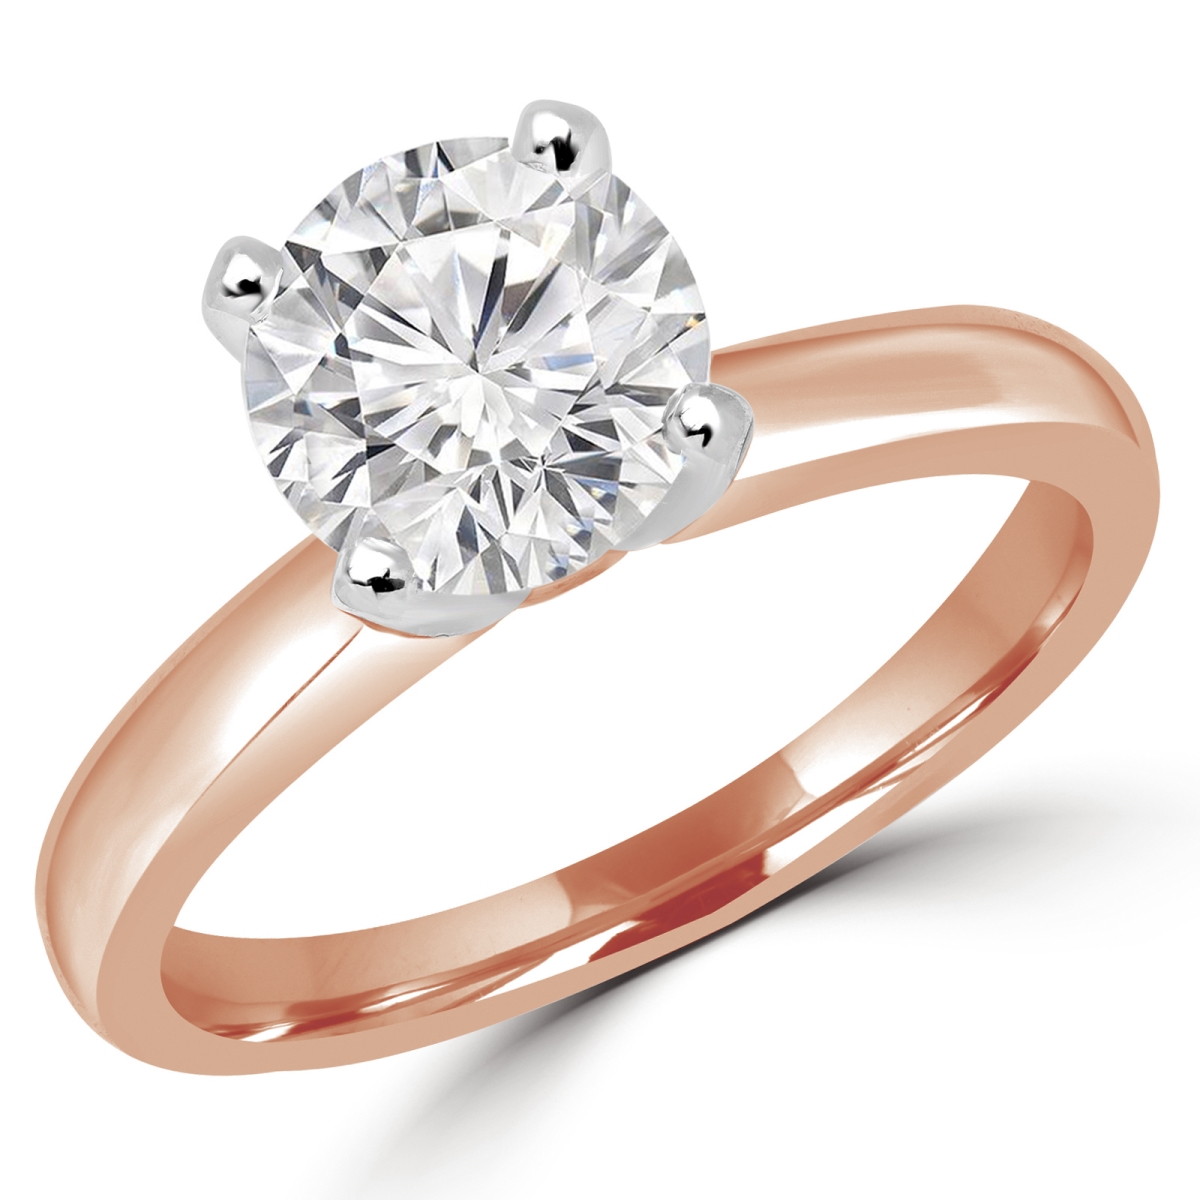 Picture of Majesty Diamonds MD180009-8.5 0.6 CT Round Diamond Solitaire Engagement Ring in 14K Rose Gold - Size 8.5